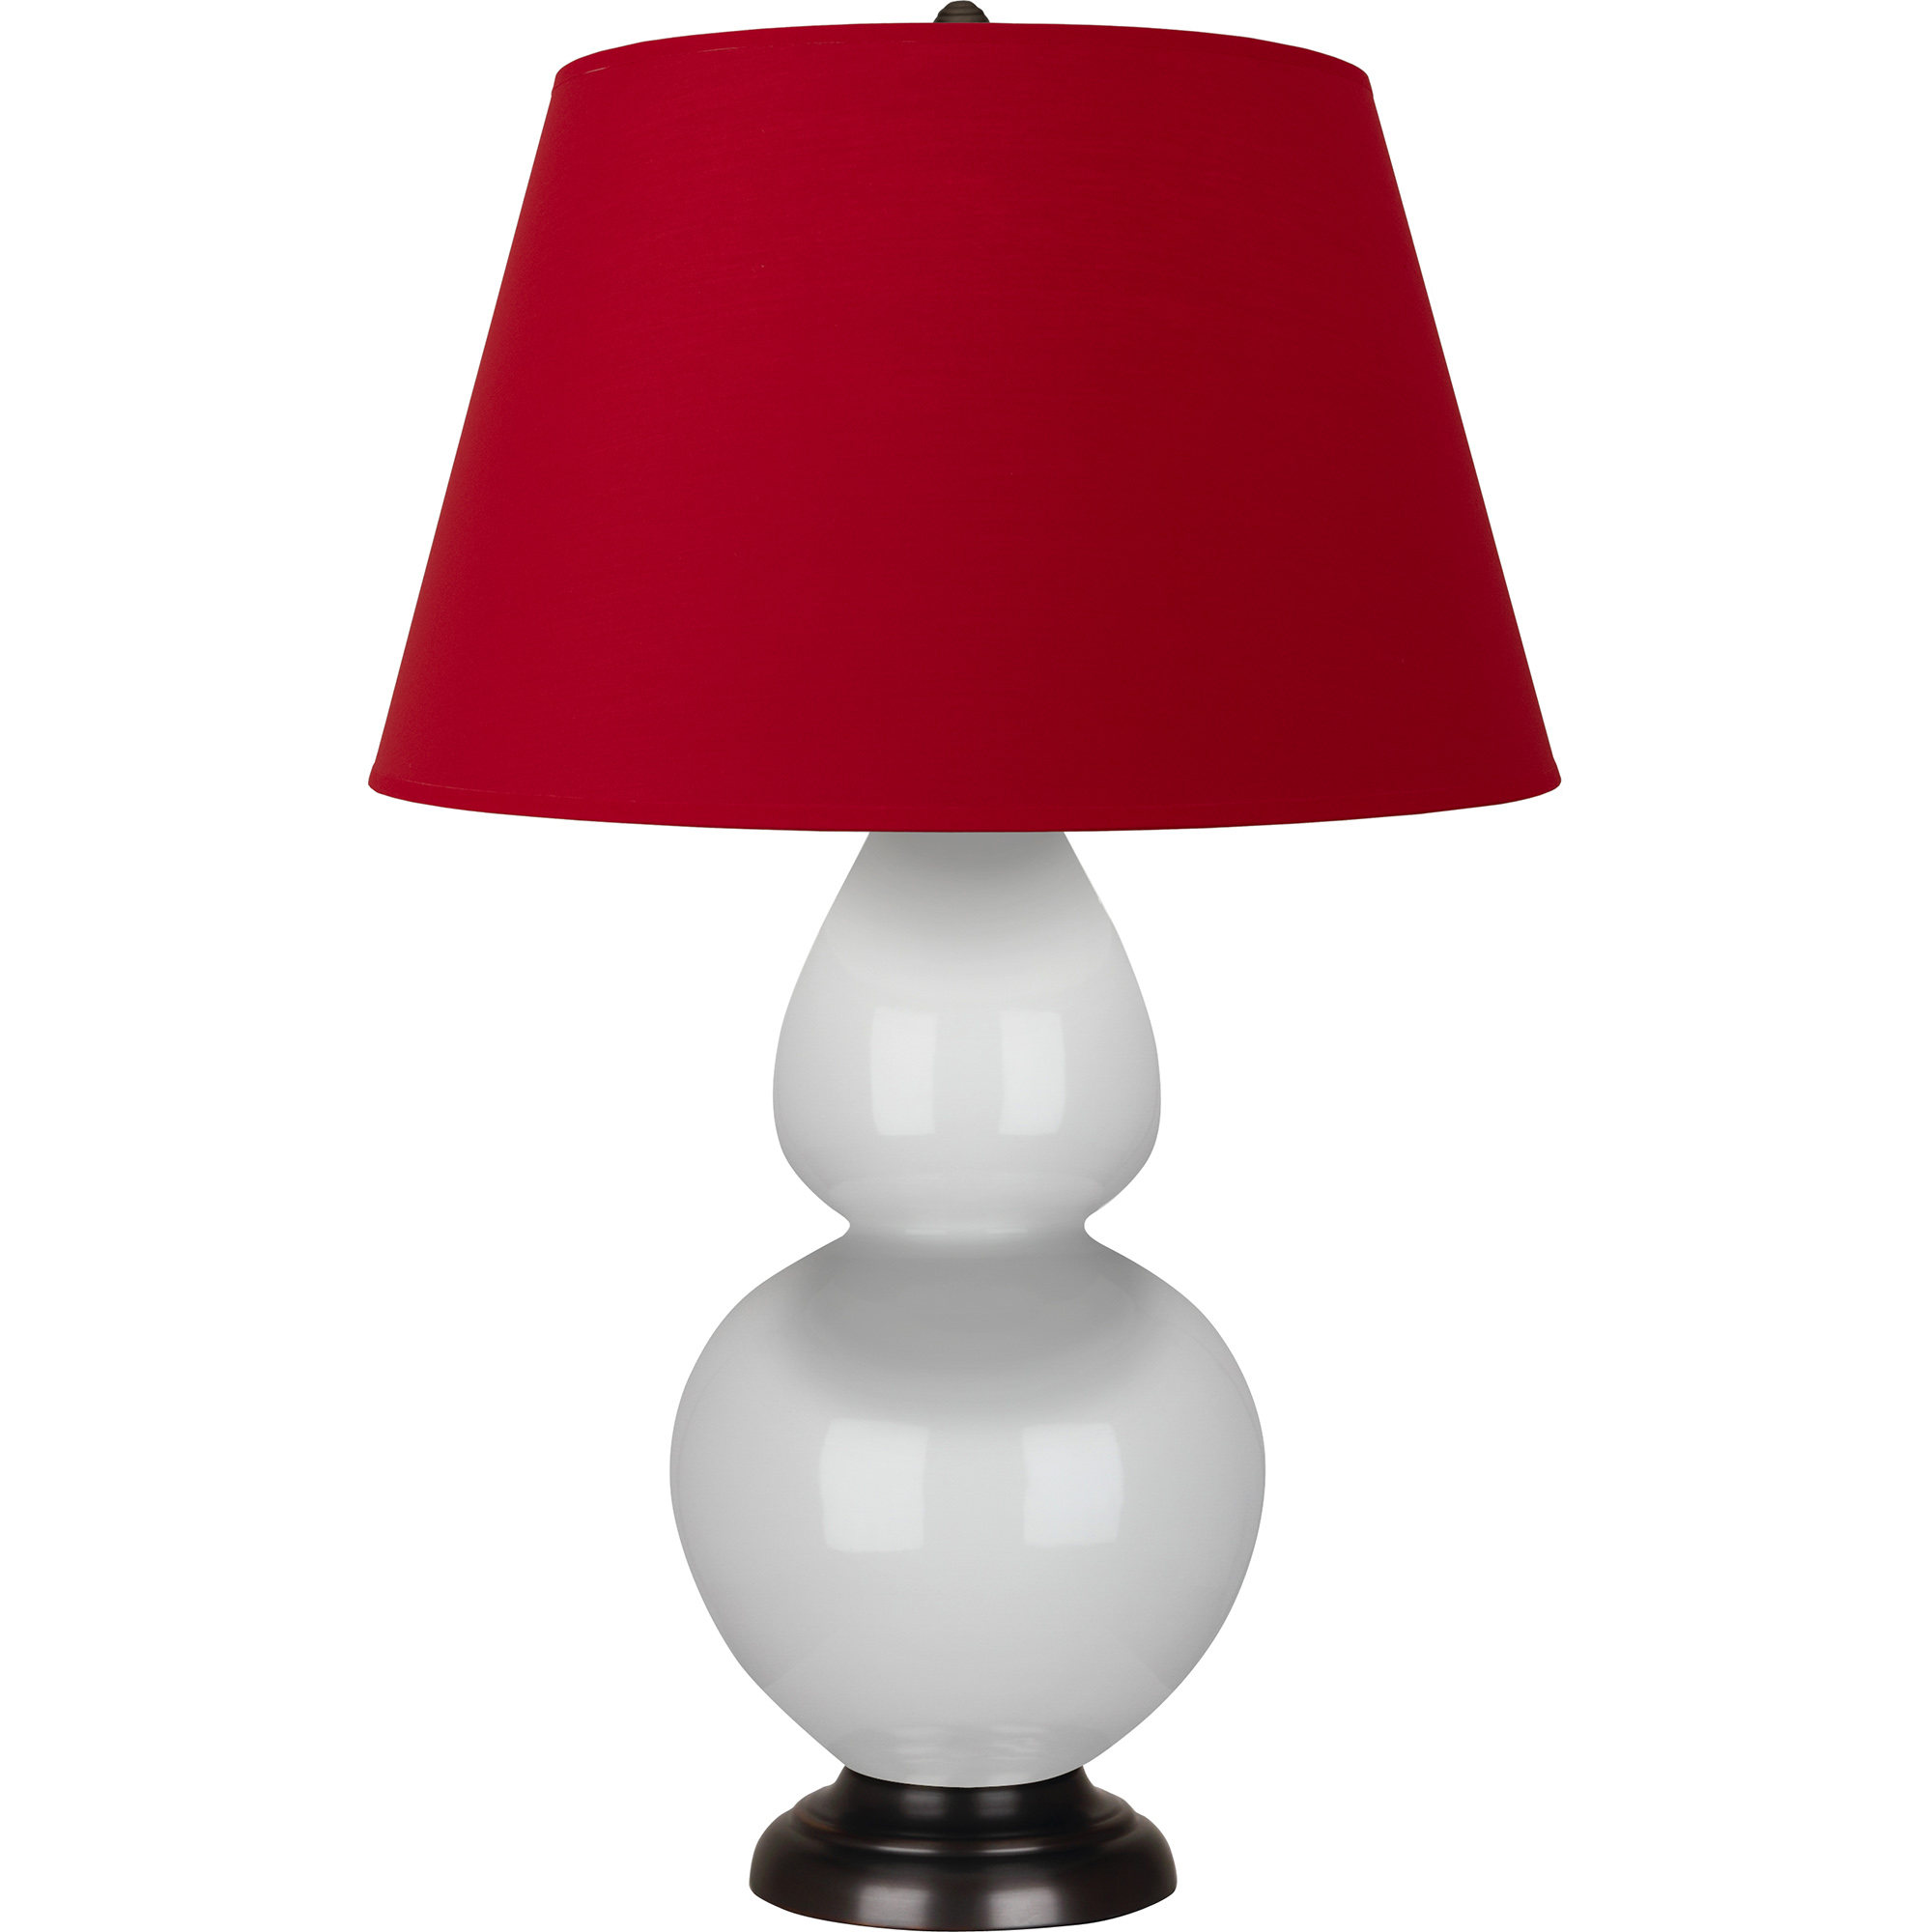 Double Gourd Table Lamp Style #1640R